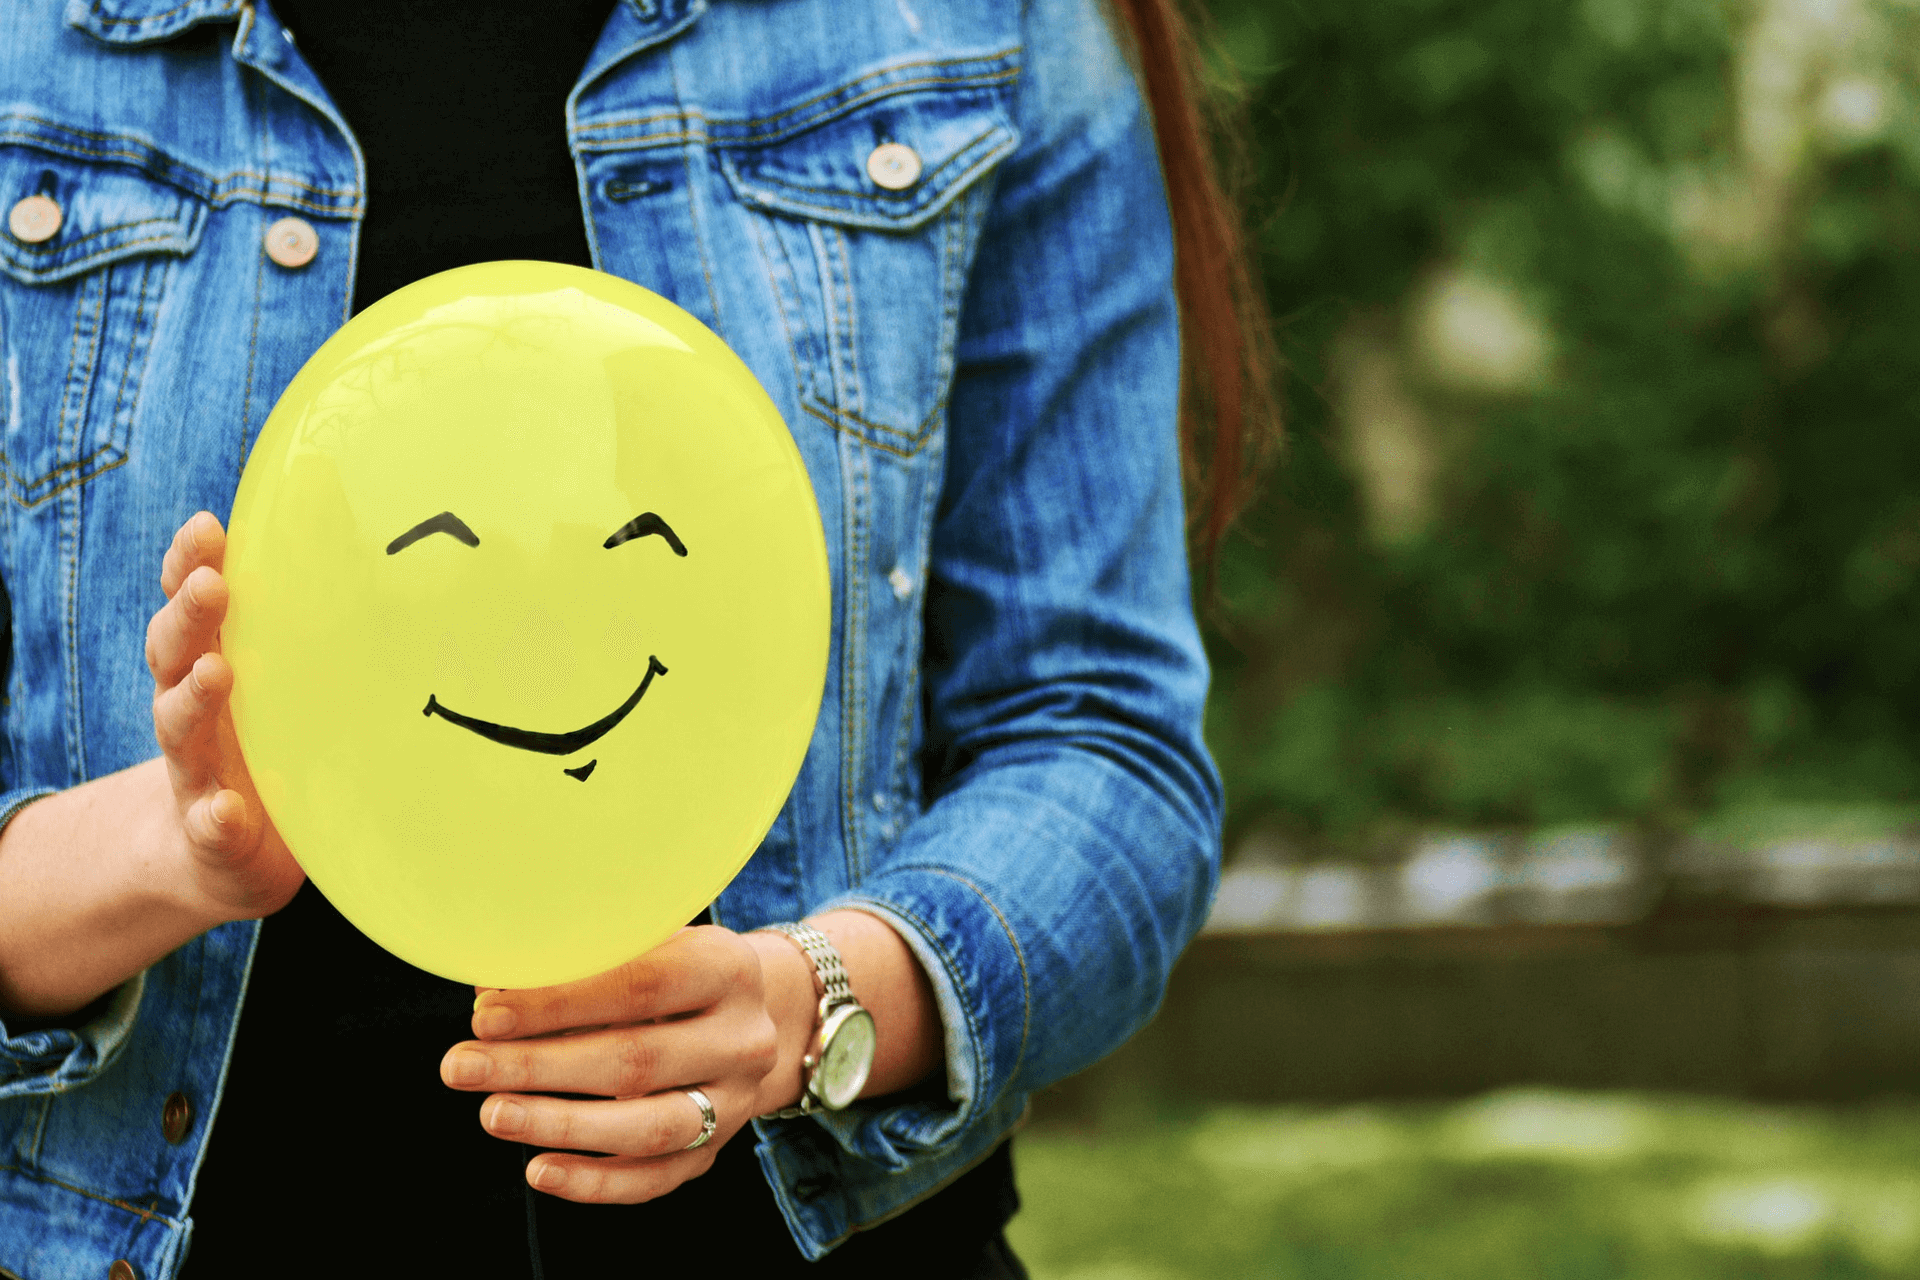 This image shows a person holding a smiley representing the importance of good donor retention strategies for nonprofits